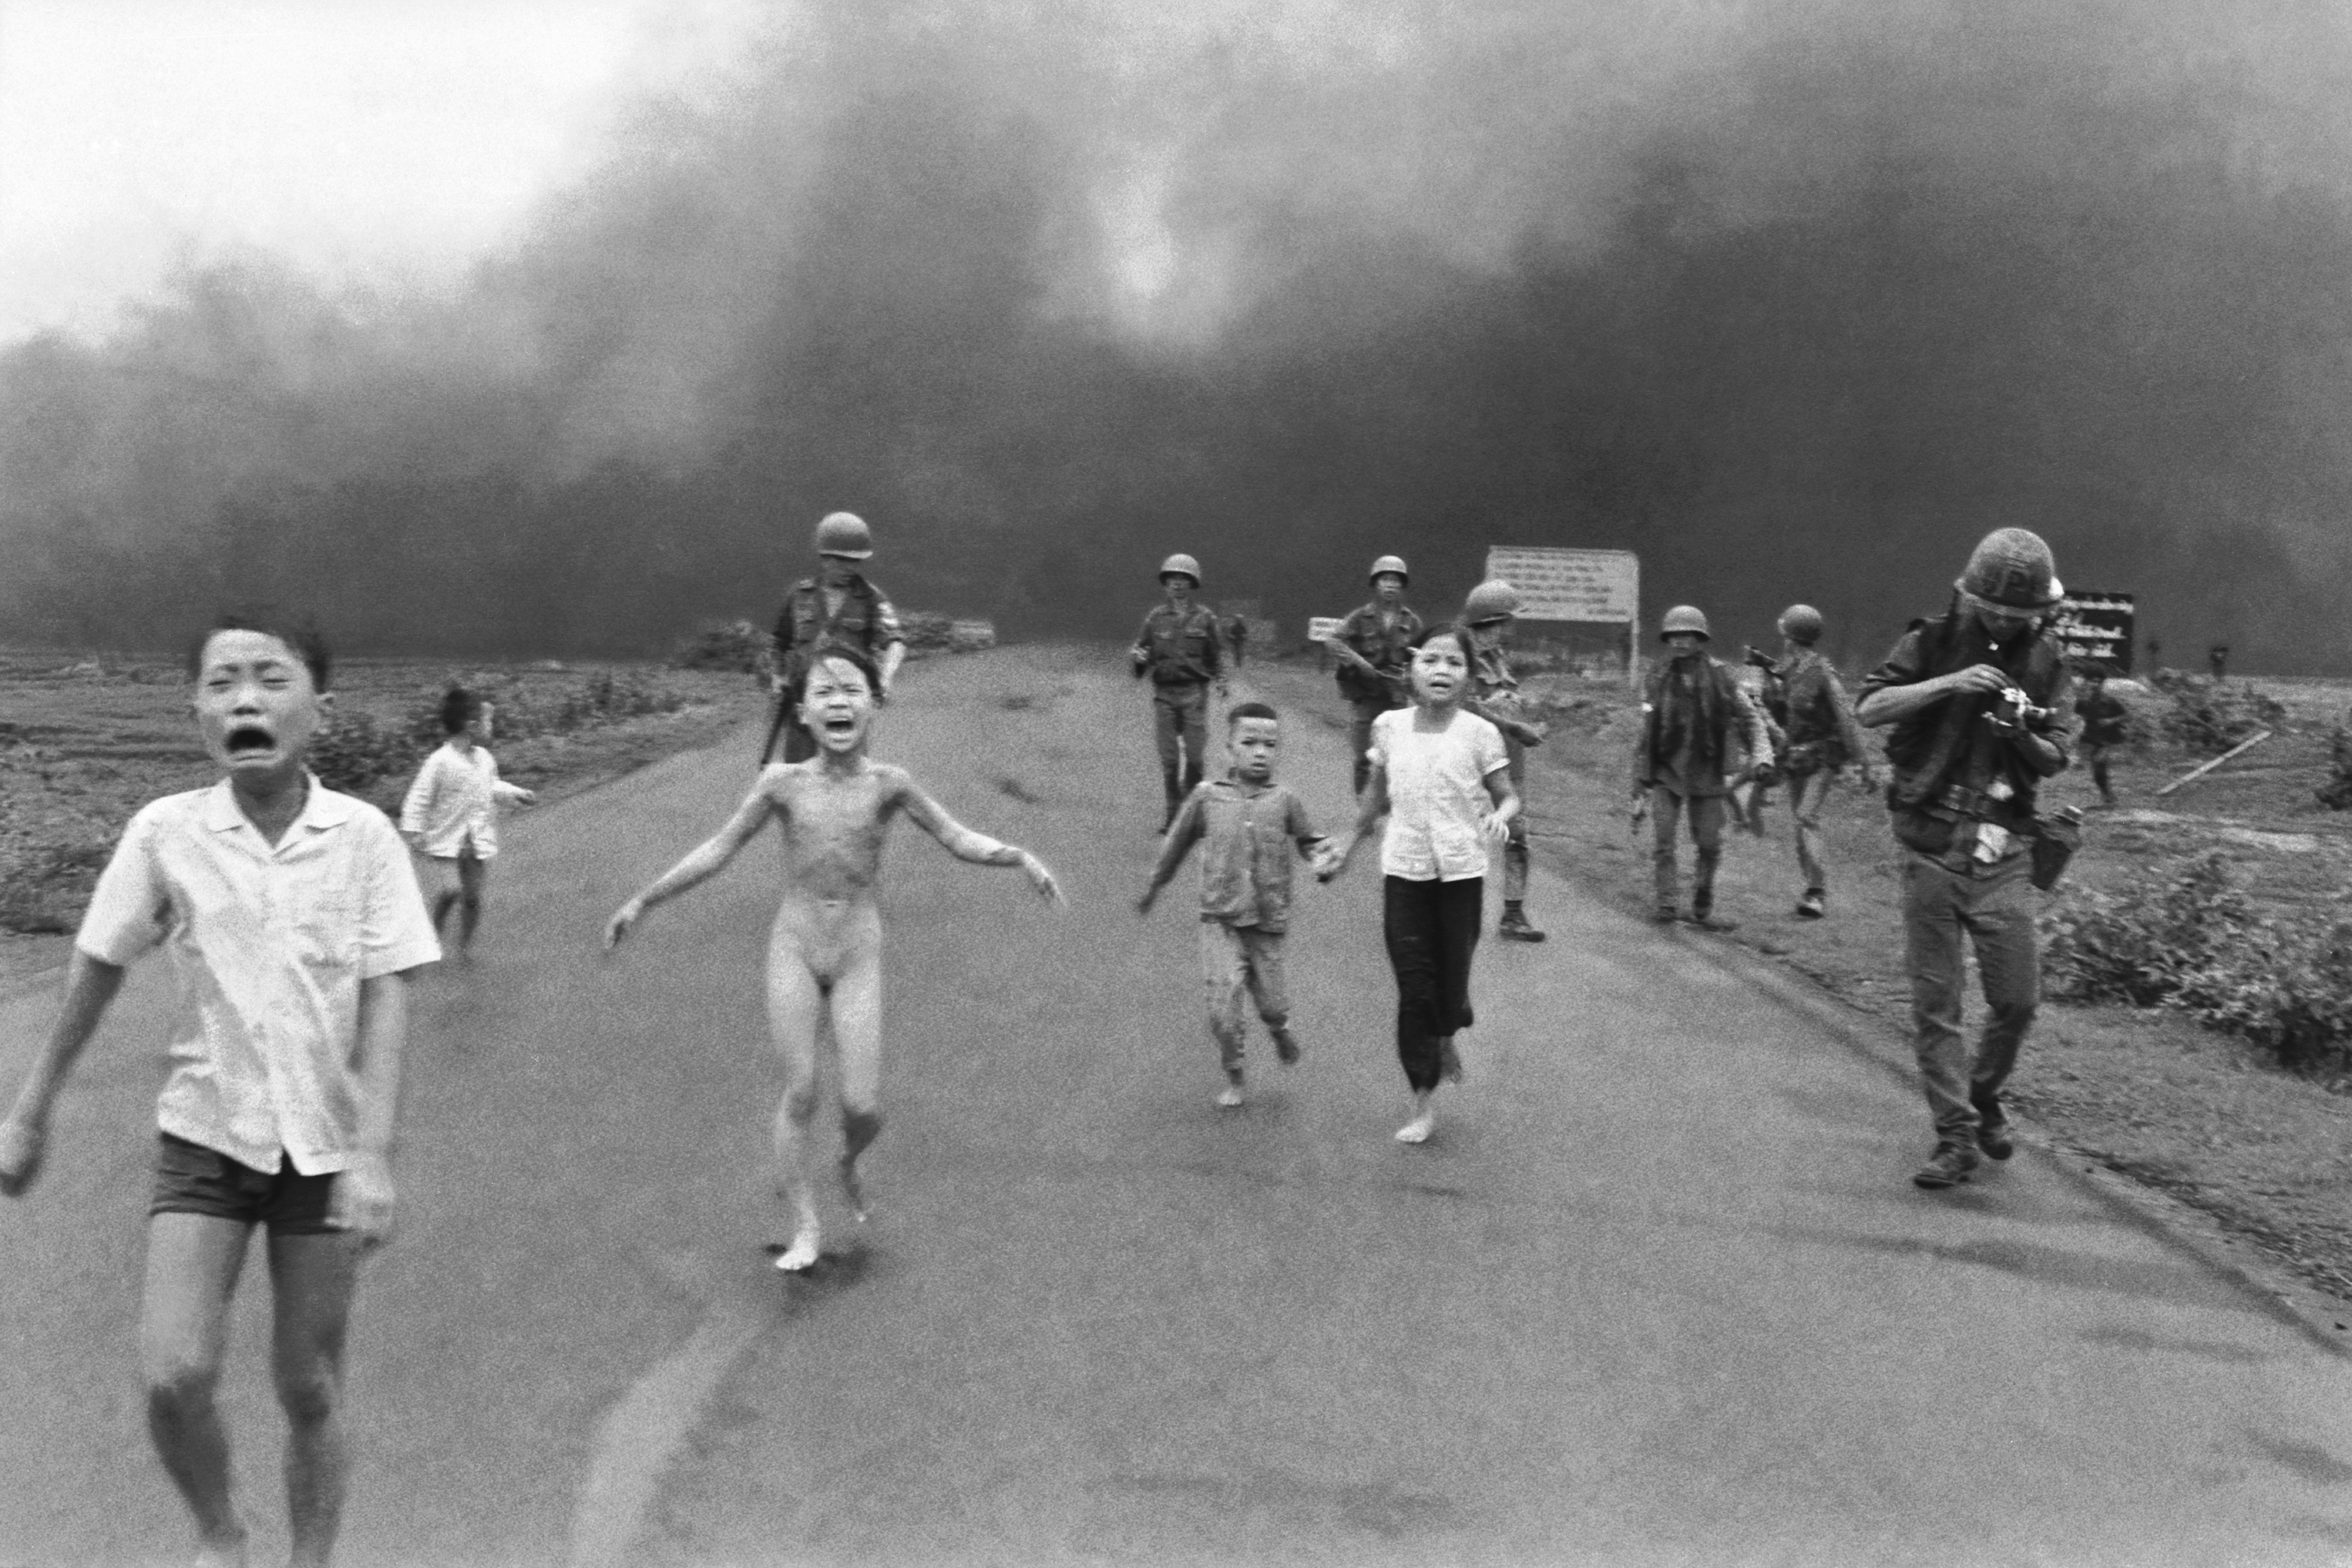 Girl in historic napalm photo found salvation, a husband and finally treatment for life-long pain